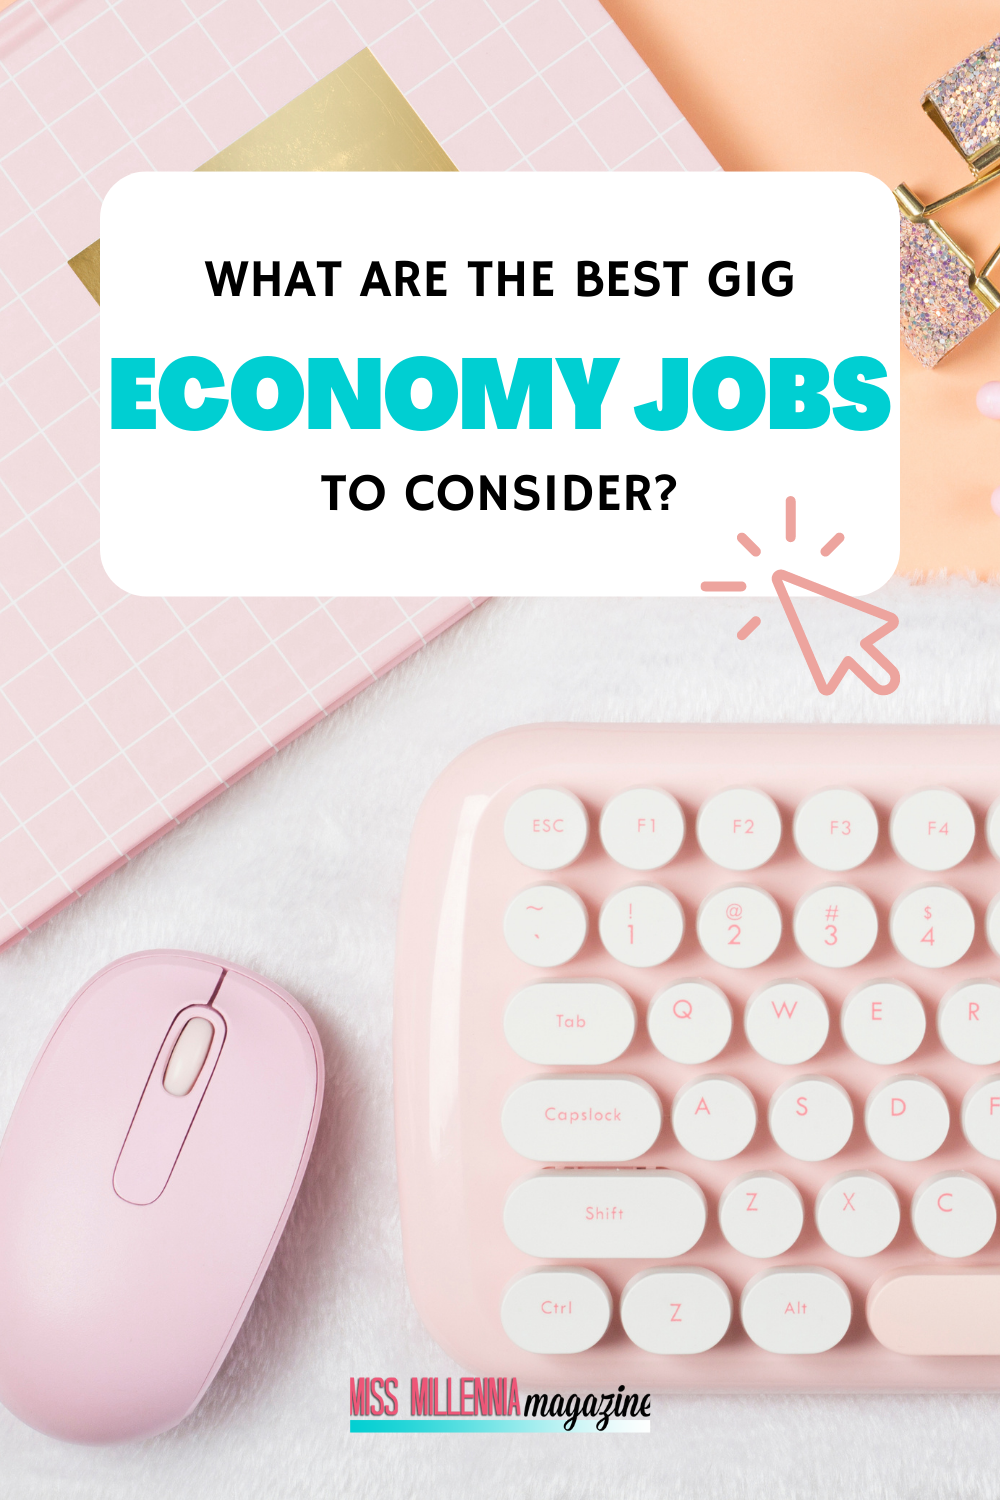 What are the Best Gig Economy Jobs to Consider?